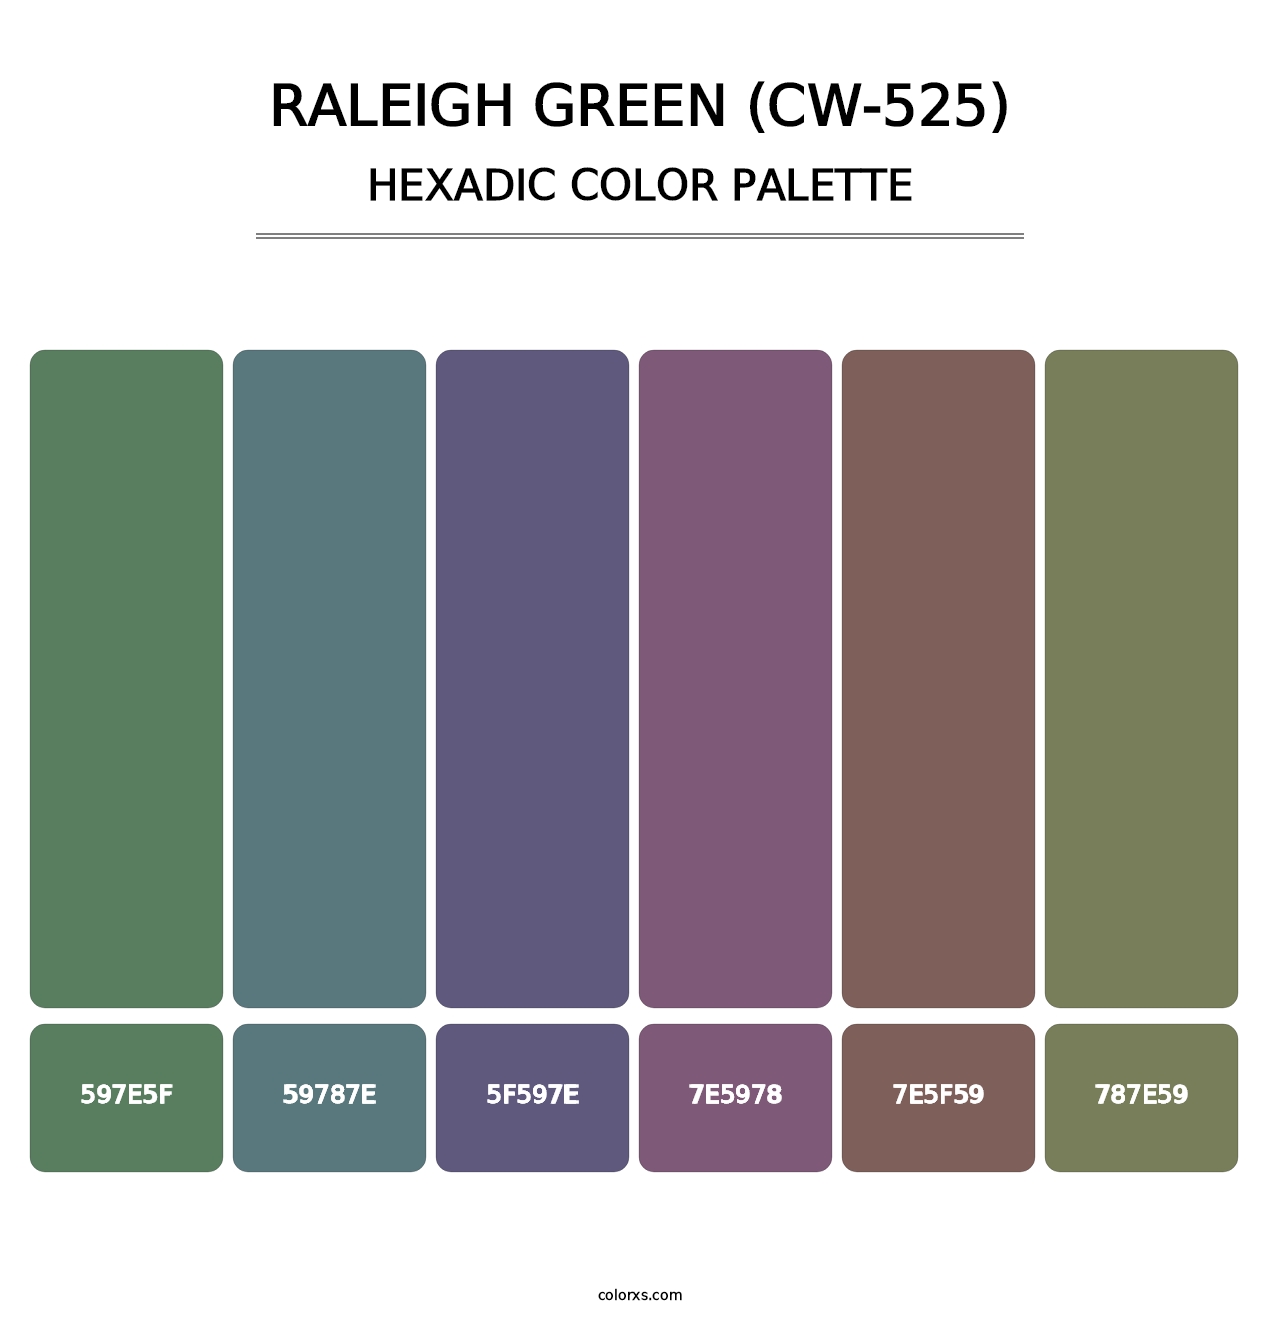 Raleigh Green (CW-525) - Hexadic Color Palette